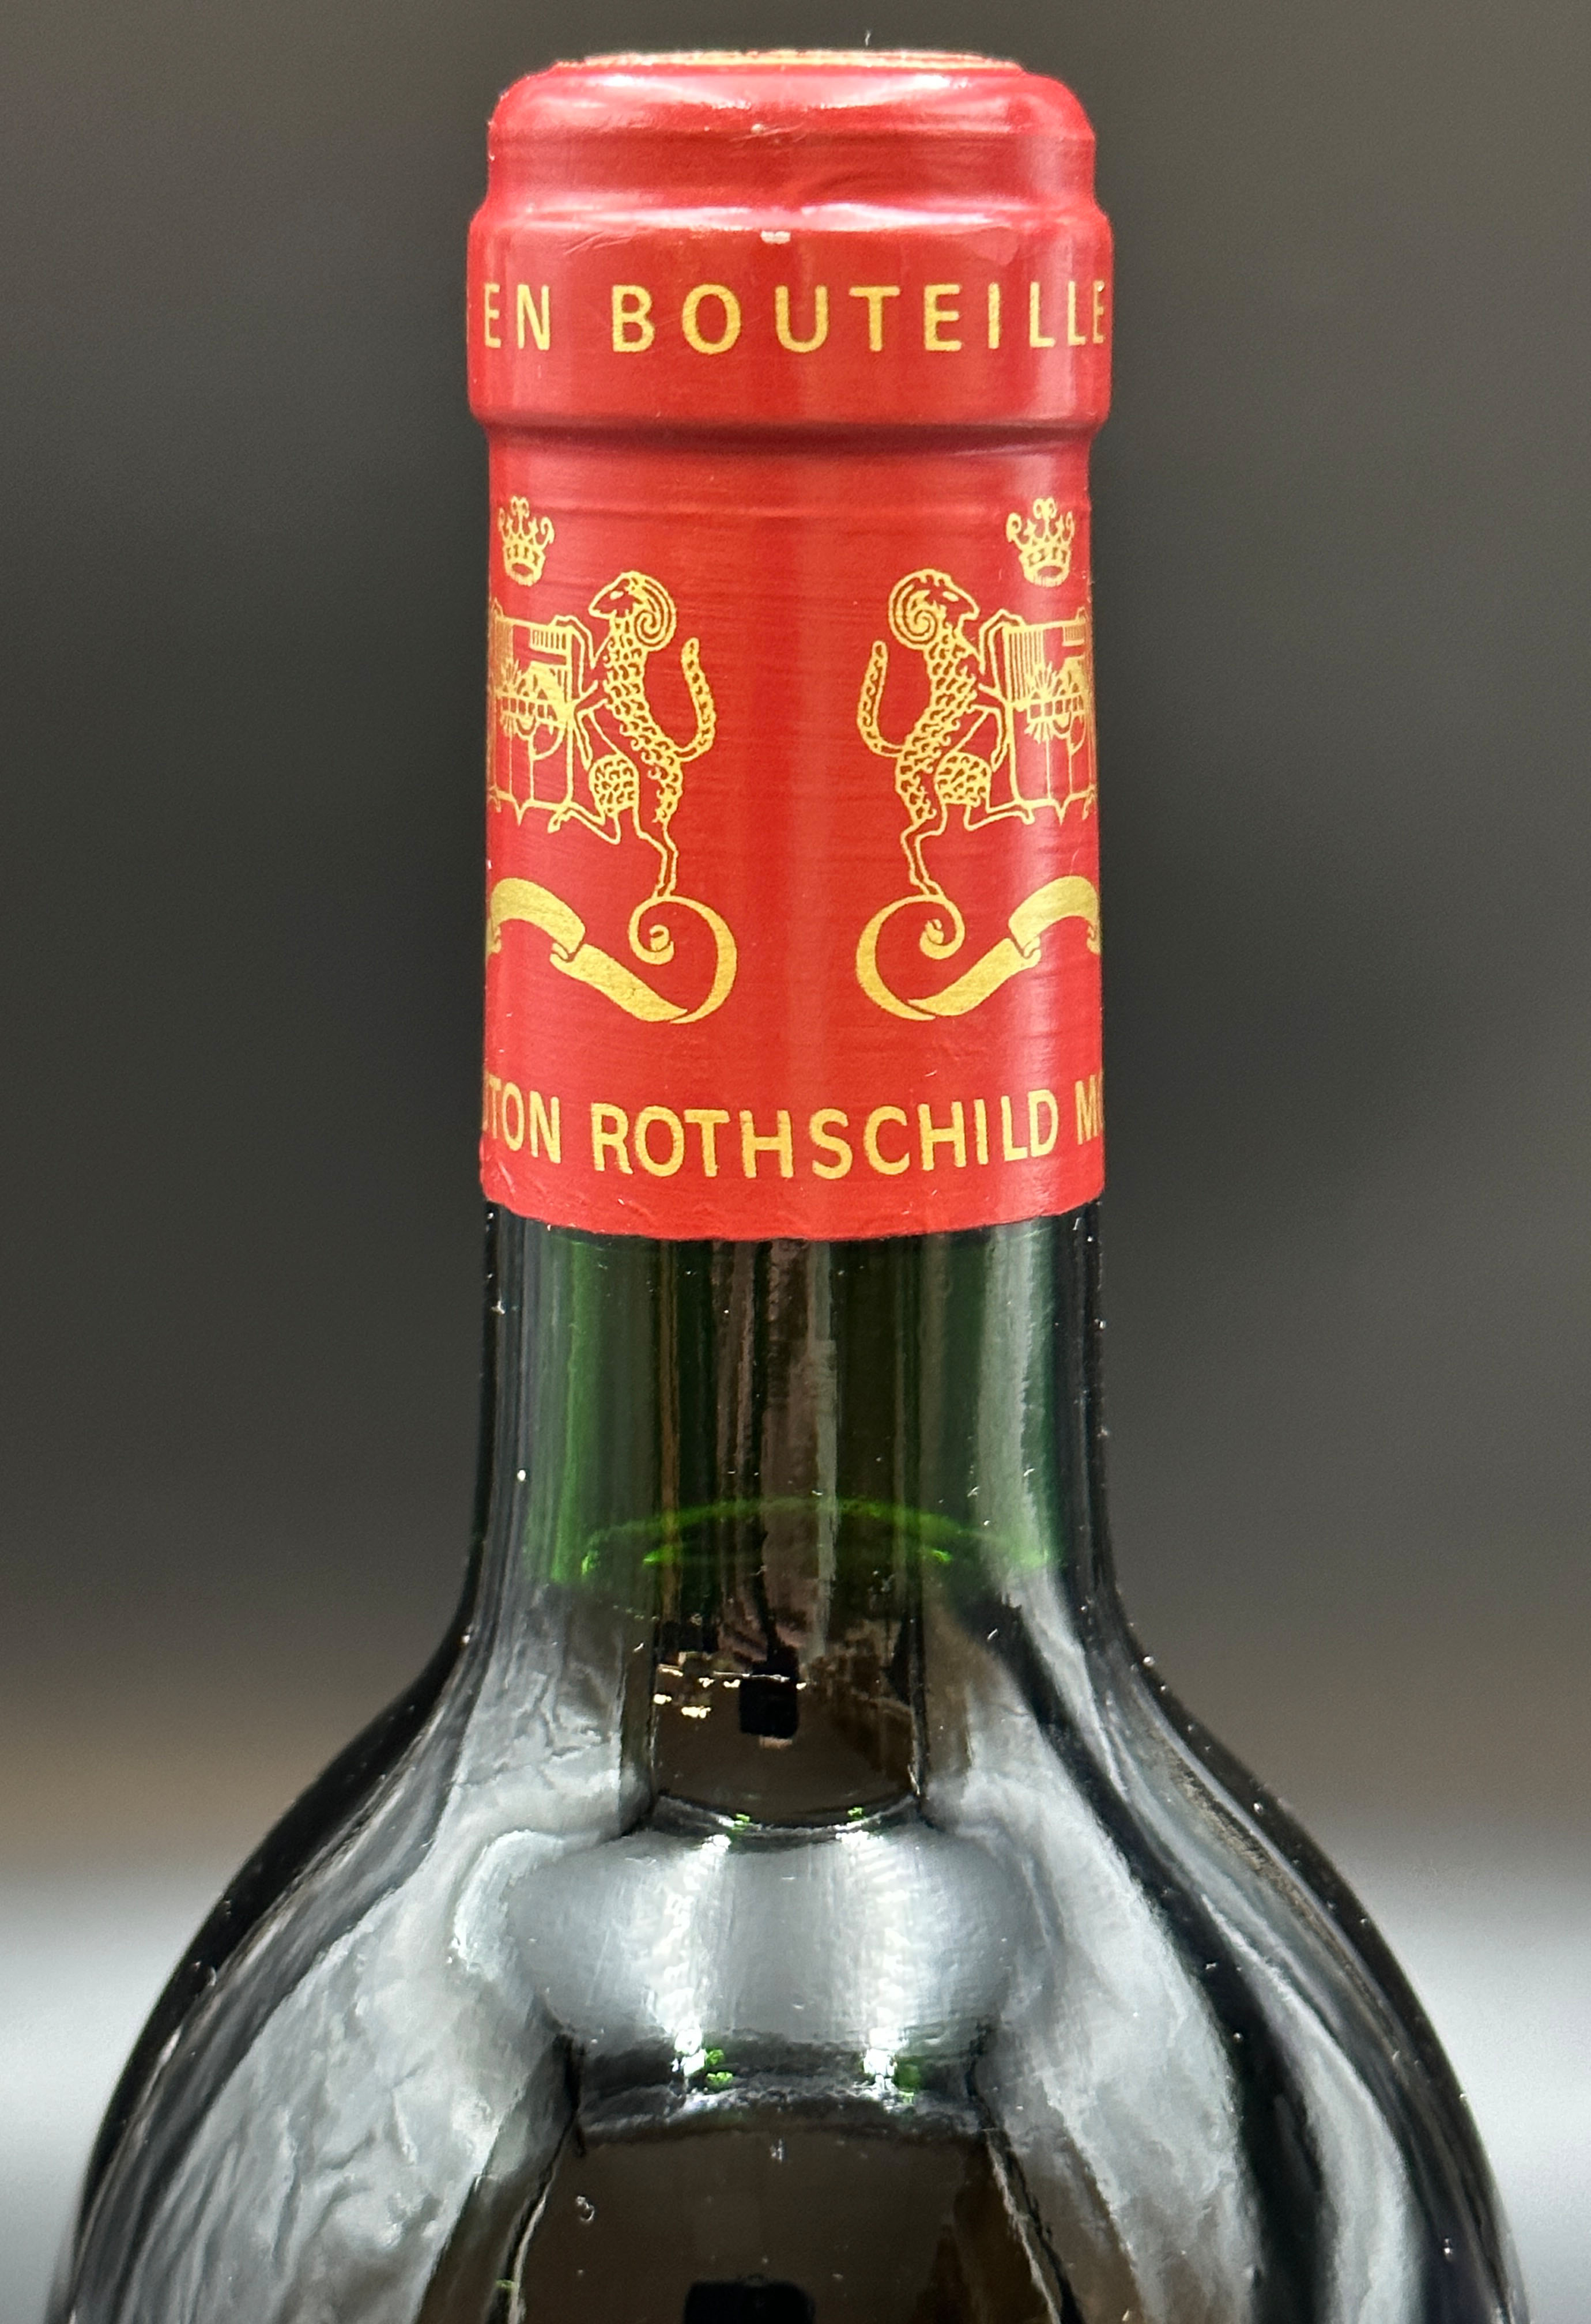 1 bottle of red wine. Château Mouton ROTHSCHILD. Paulliac. 1989. France. - Image 4 of 4